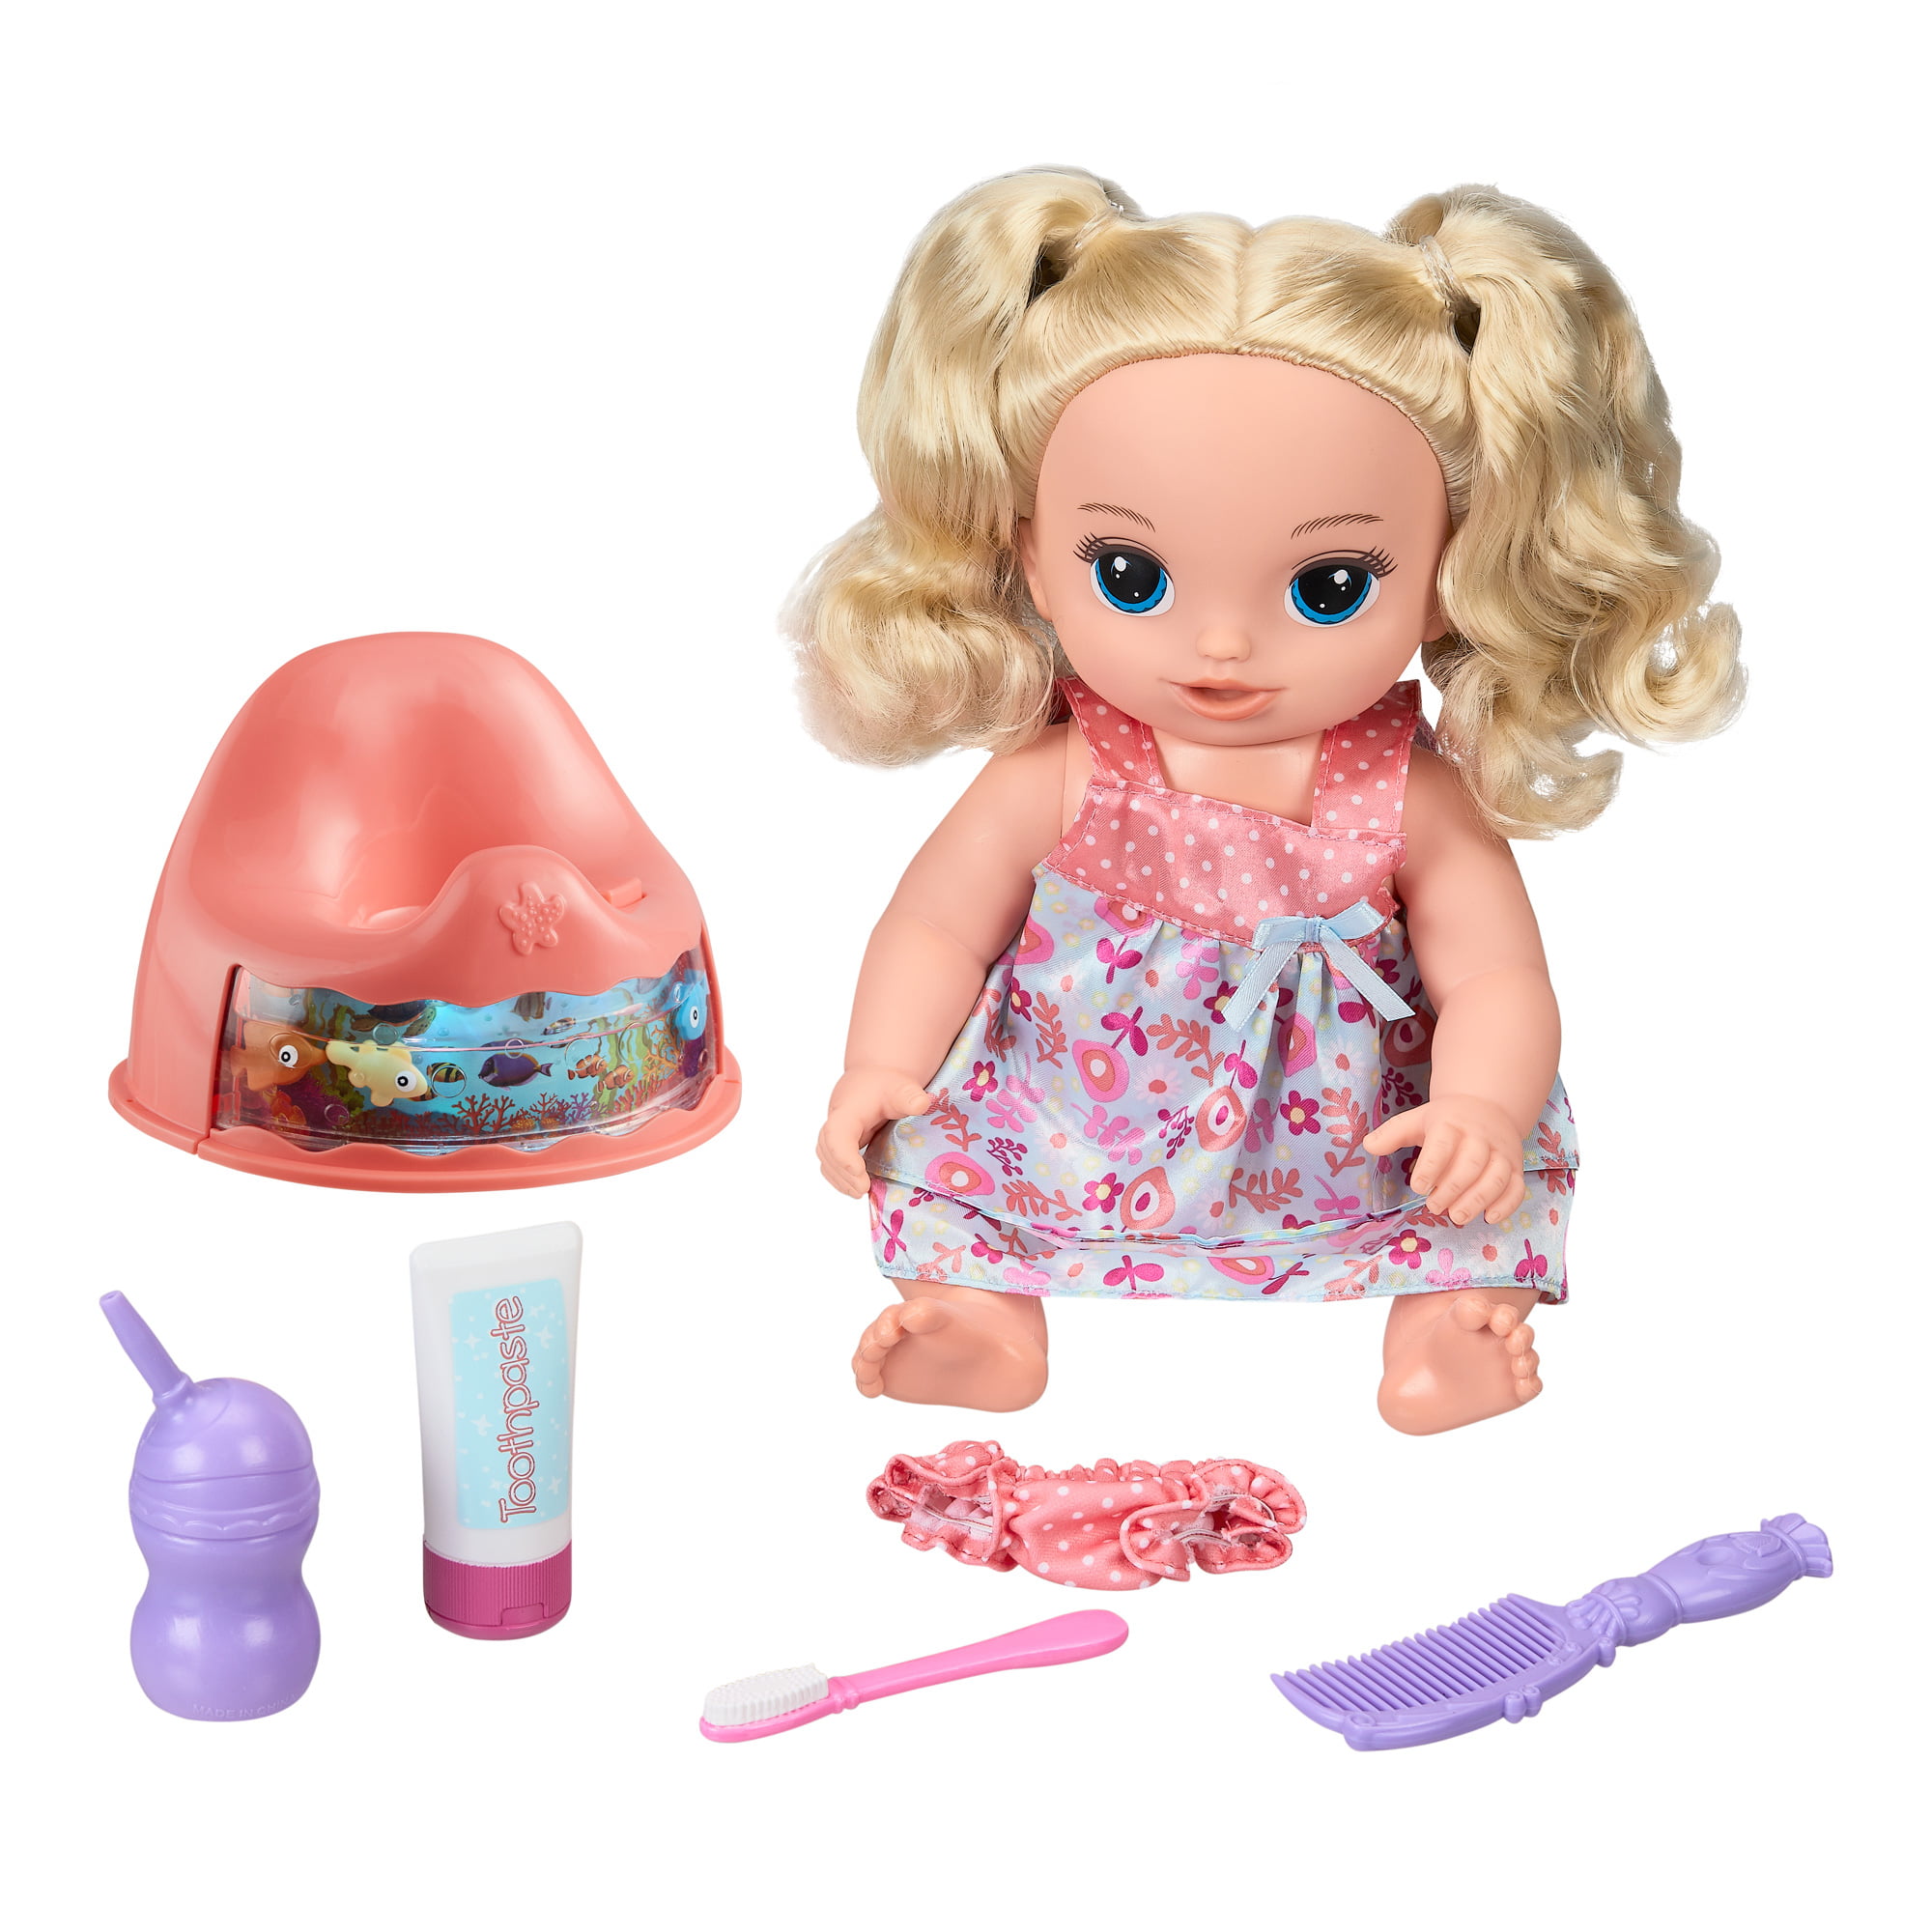 TINY MINI BABY DOLL DRESSED IN CUTE DRESS SITTING IN BUMBEE WITH BOTTLE  new 